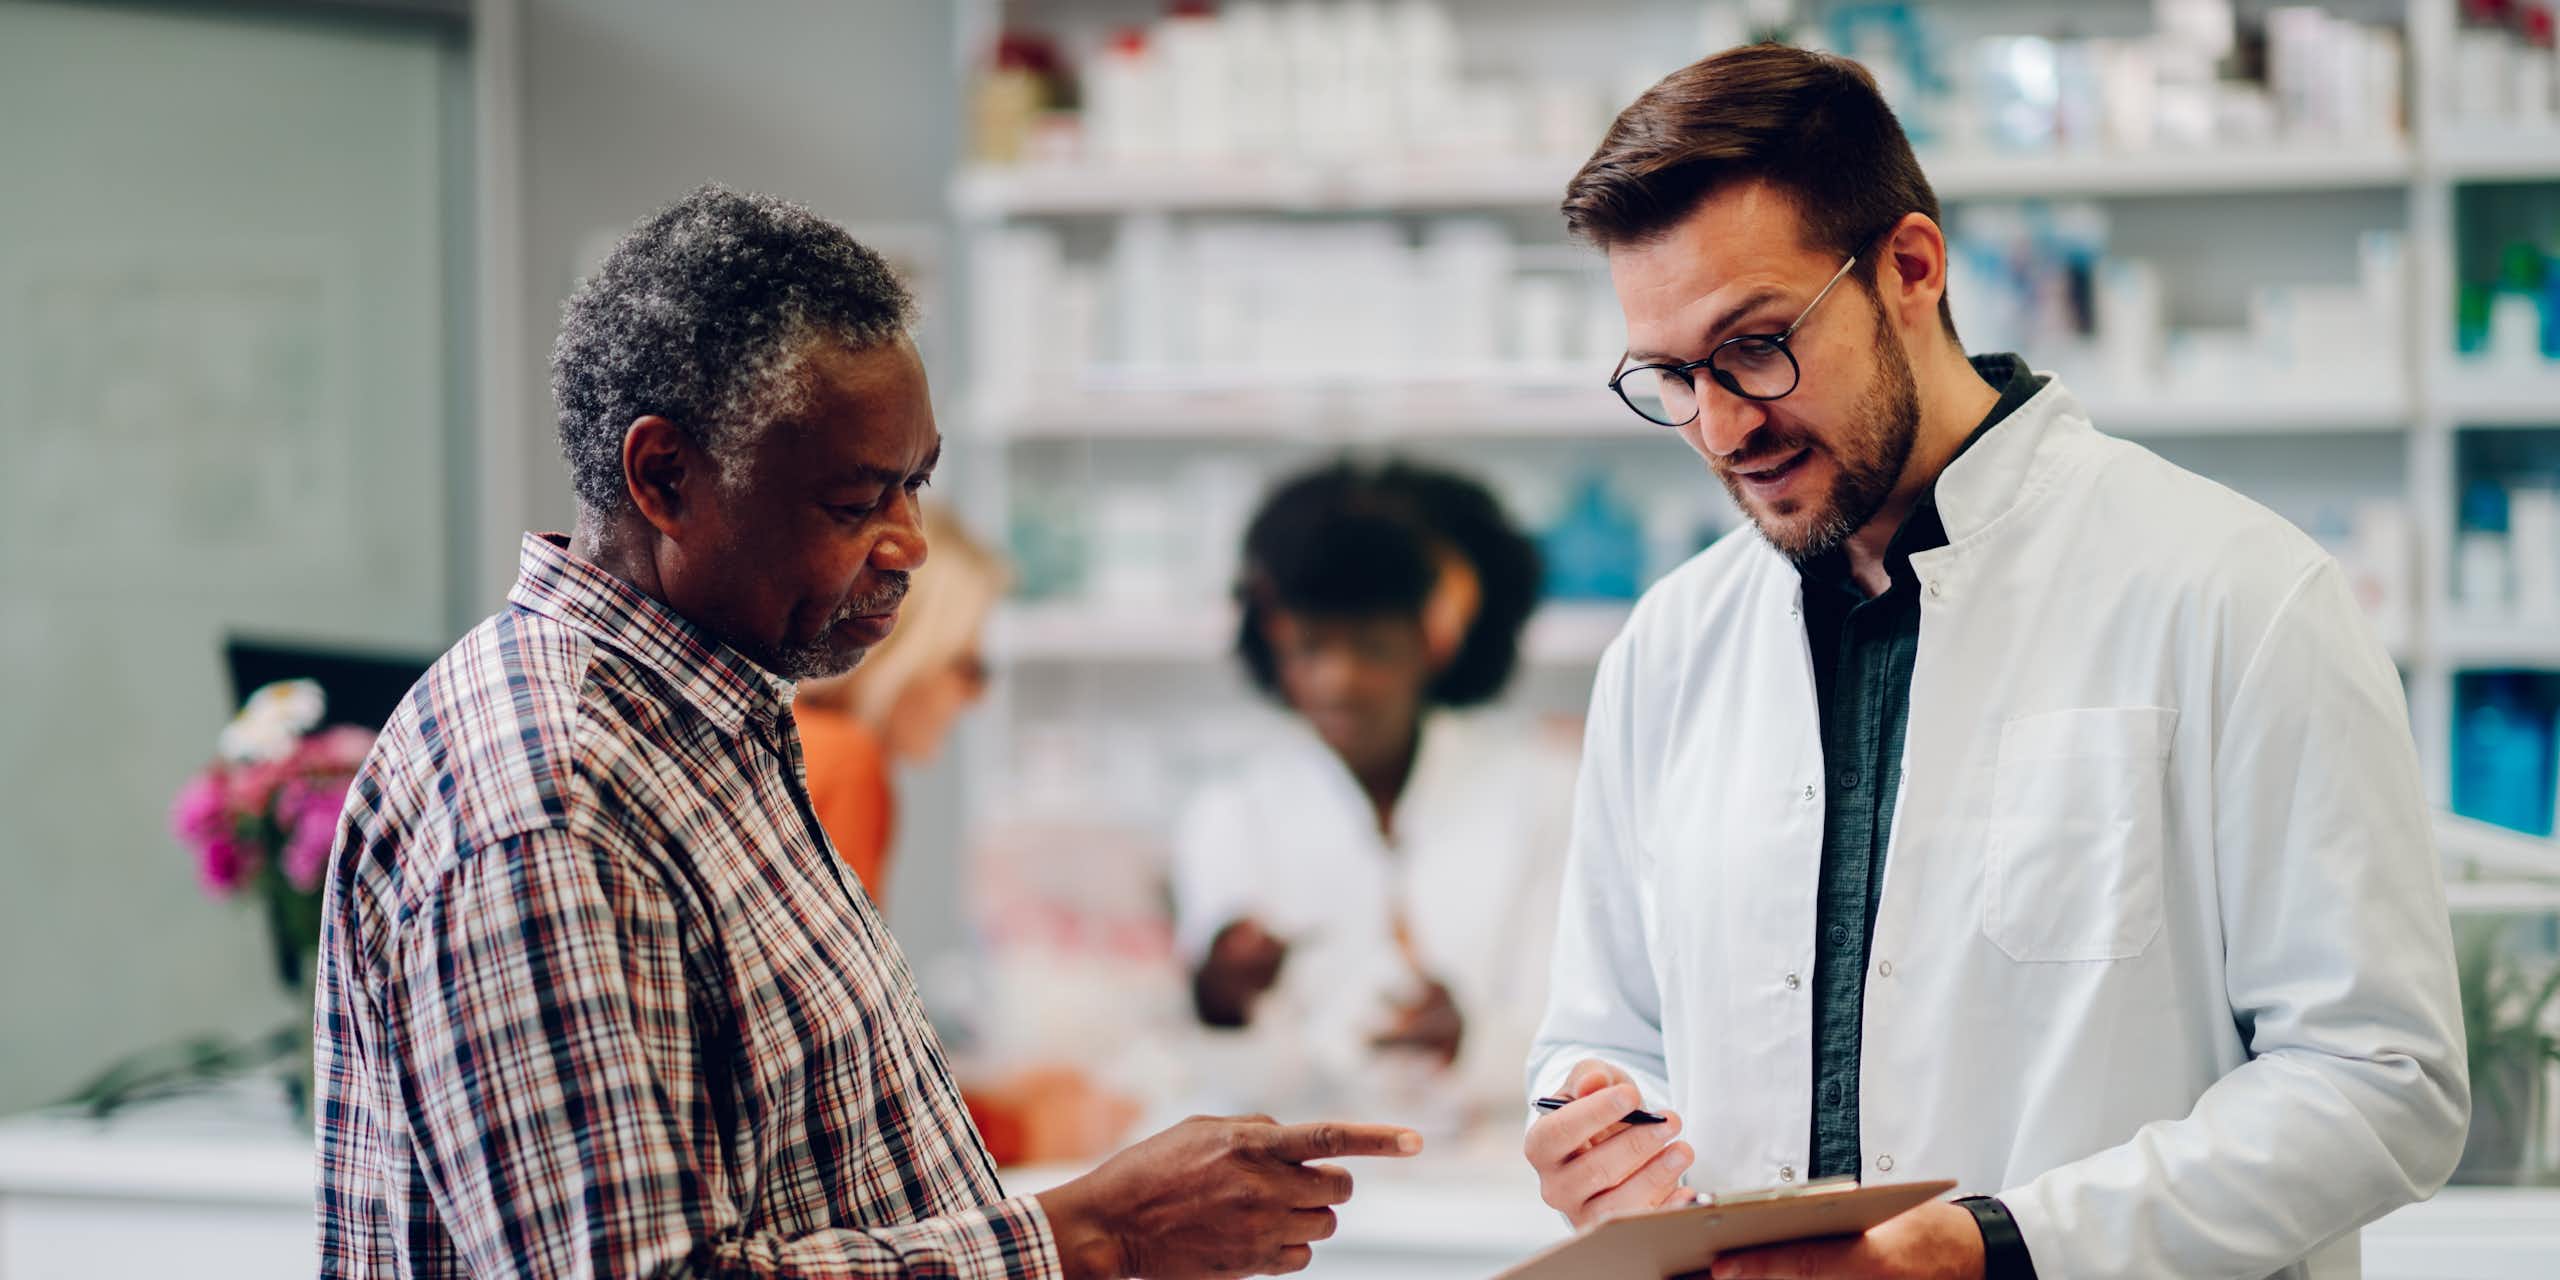 A pharmacist talking to a customer, showing him a clipboard.